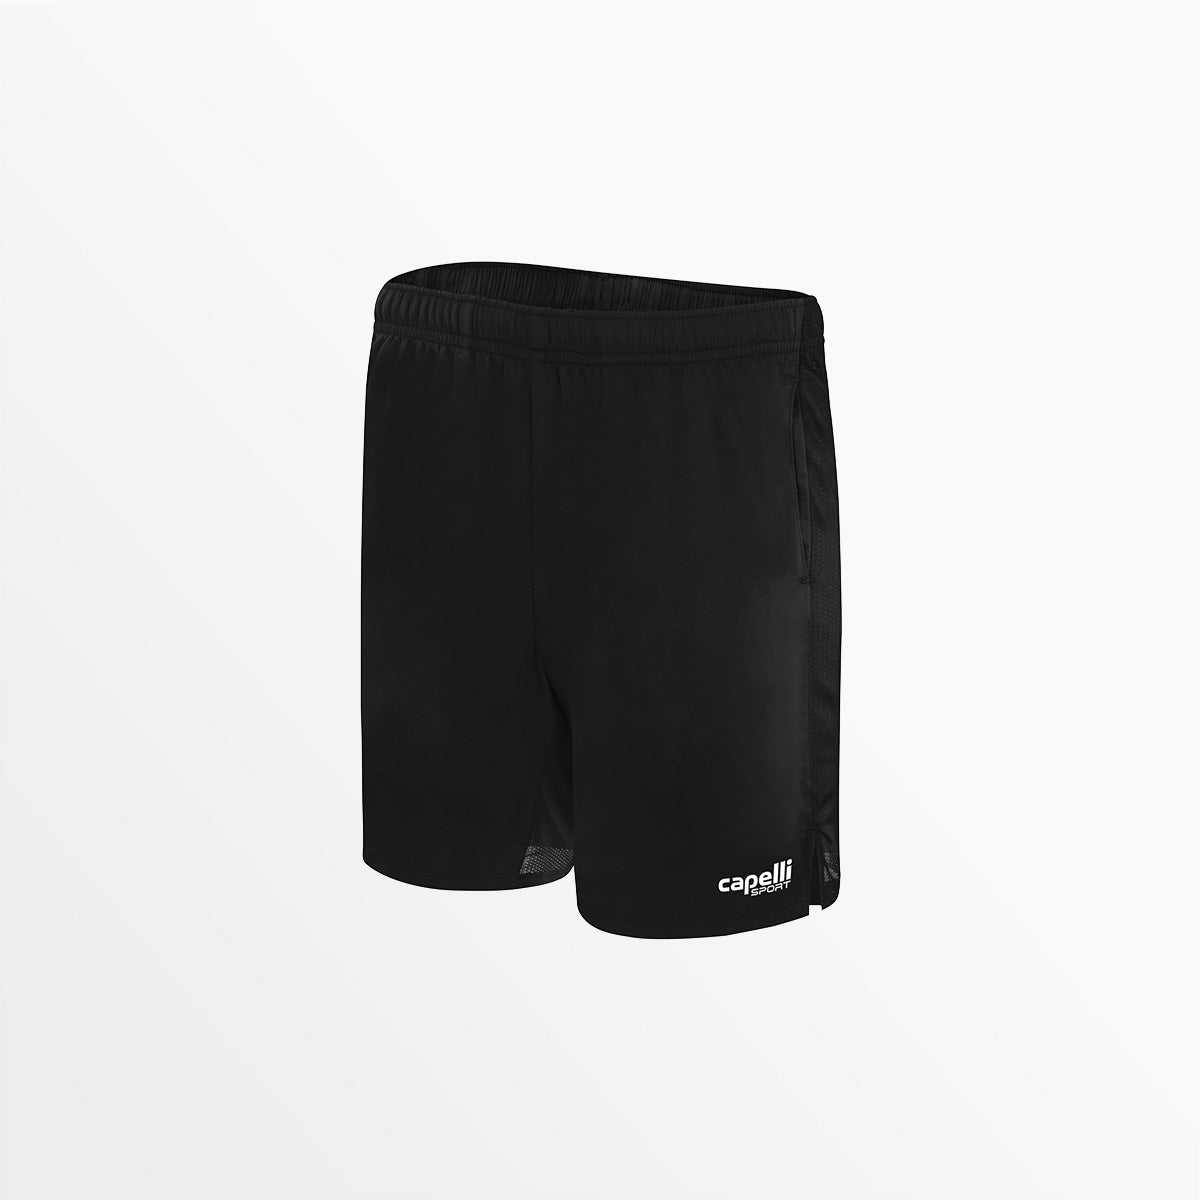 MEN'S CLASSIC WOVEN RUNNING SHORTS WITH INNER BRIEF 5'' INSEAM